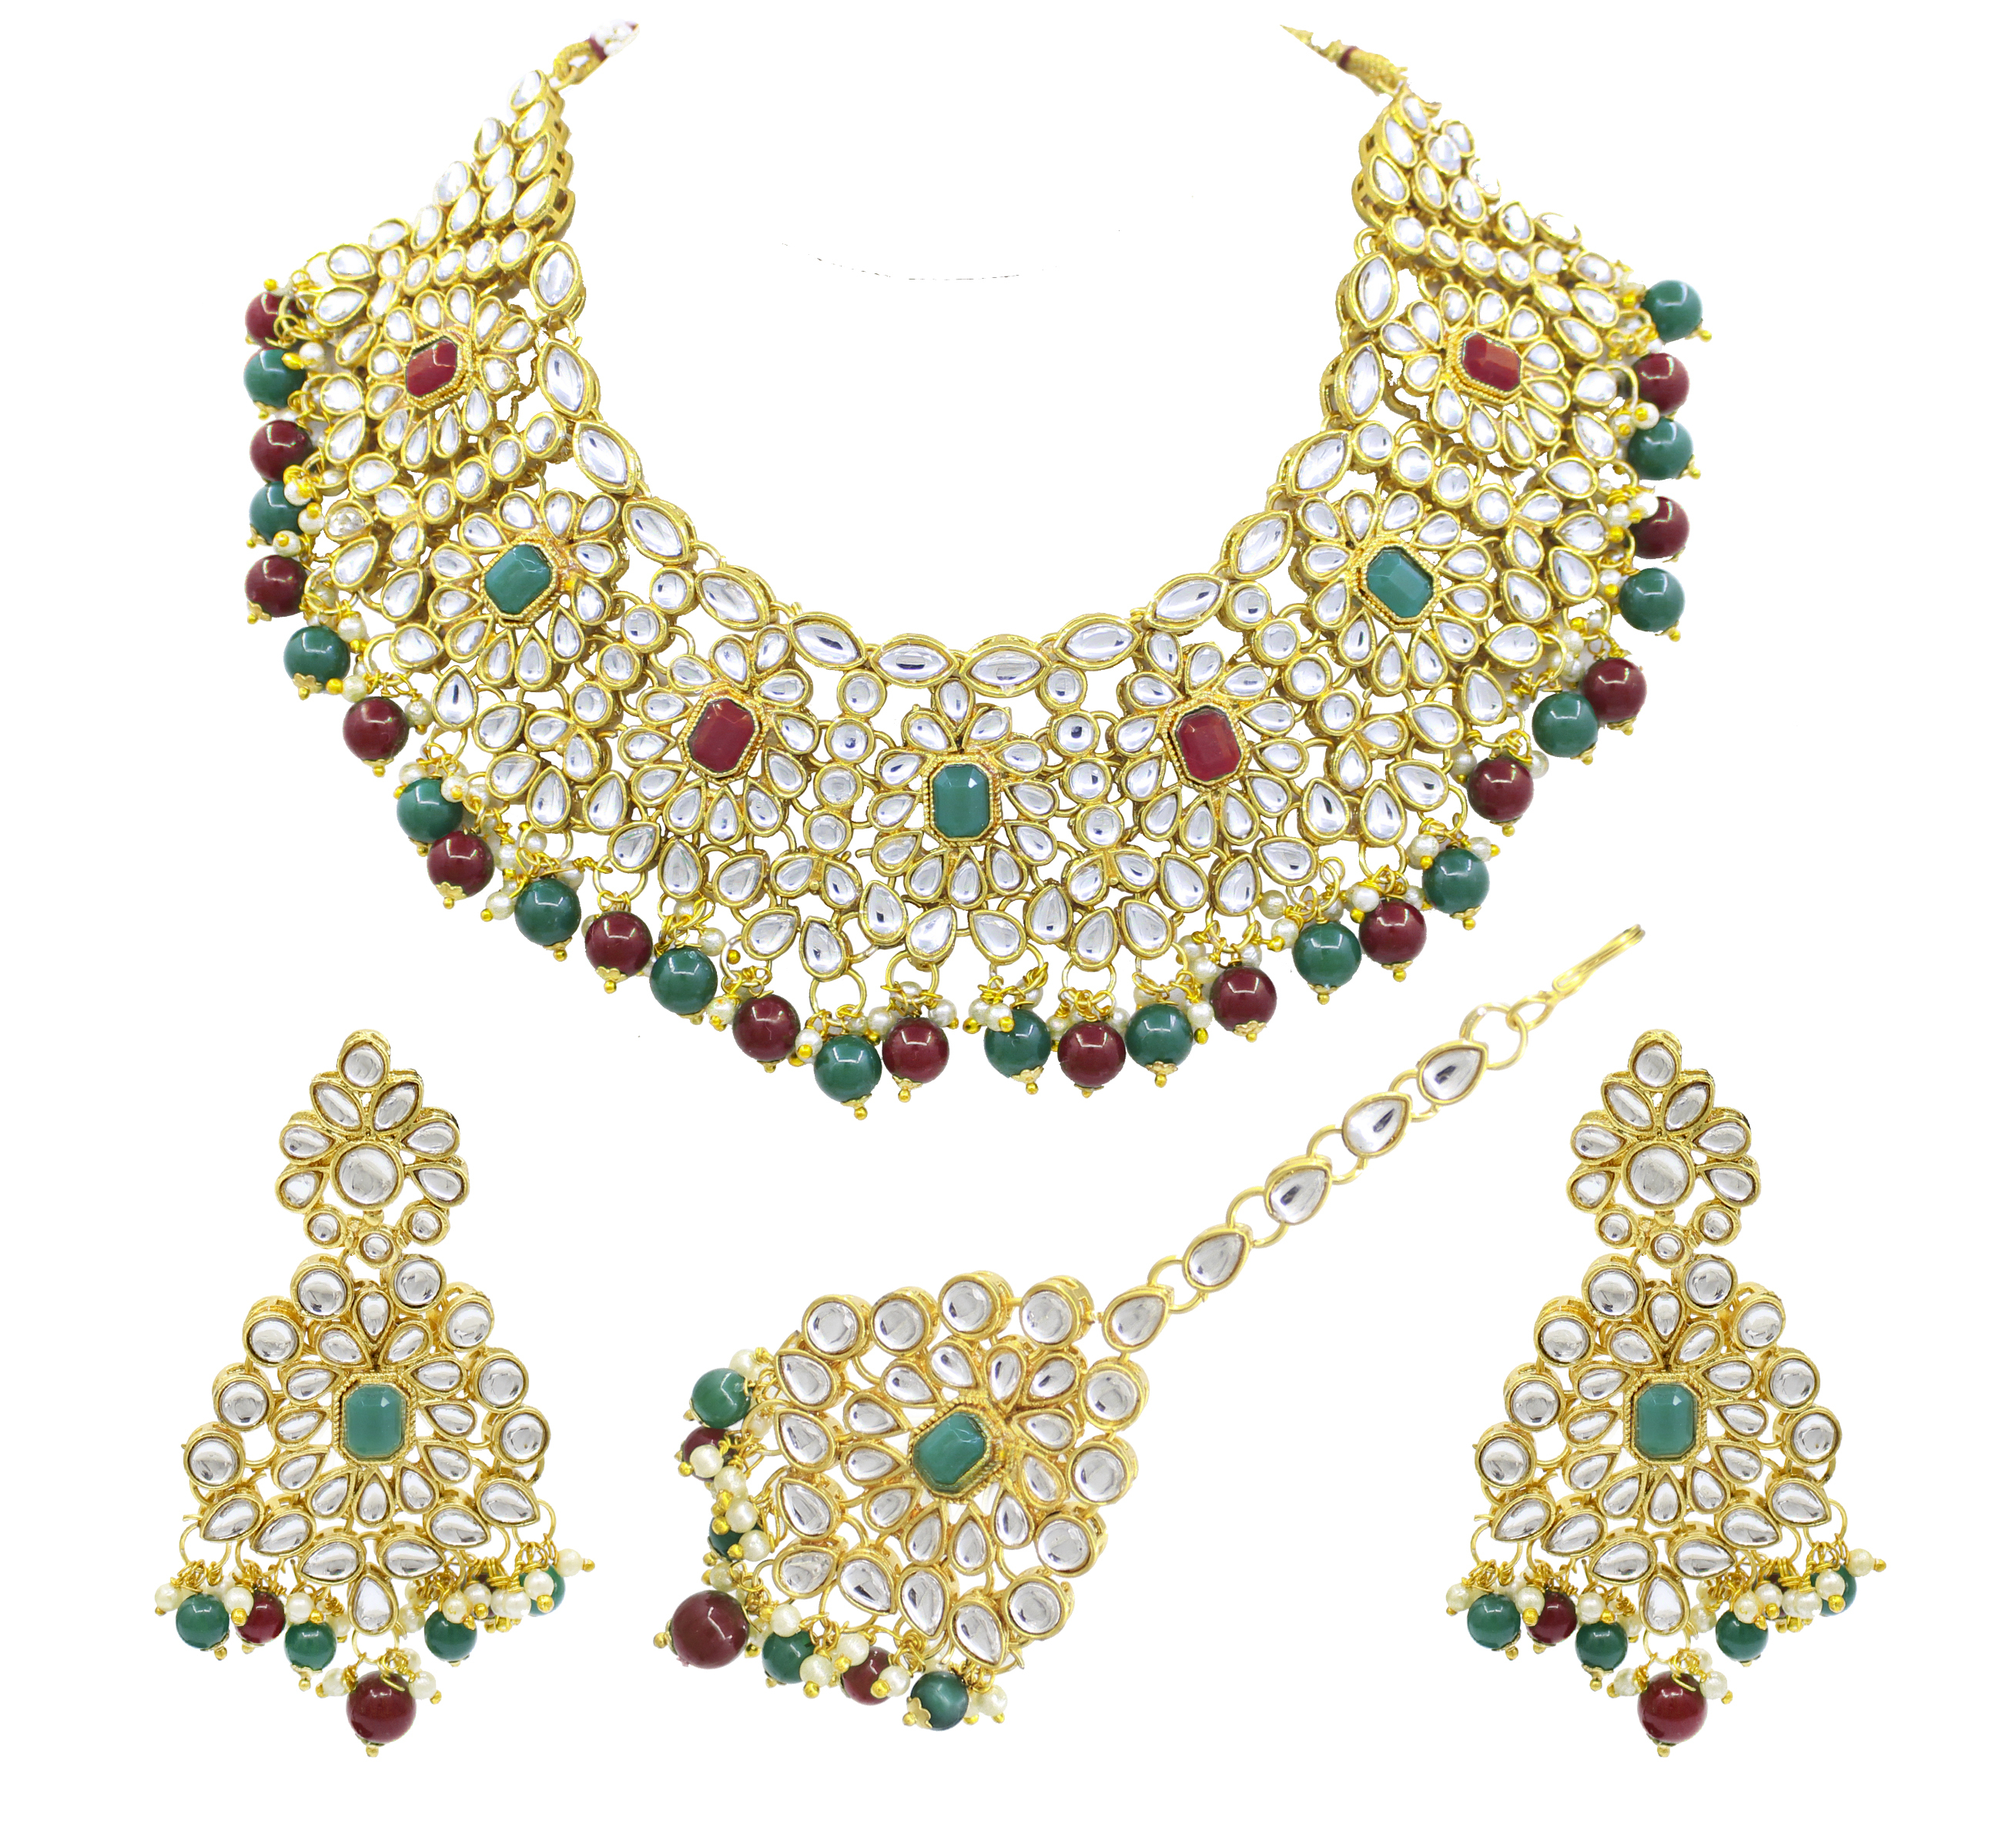 Ethnic Design Party Wear Gold Plated Multi Color Choker Necklace Earring With Maangtikka Jewellery Set